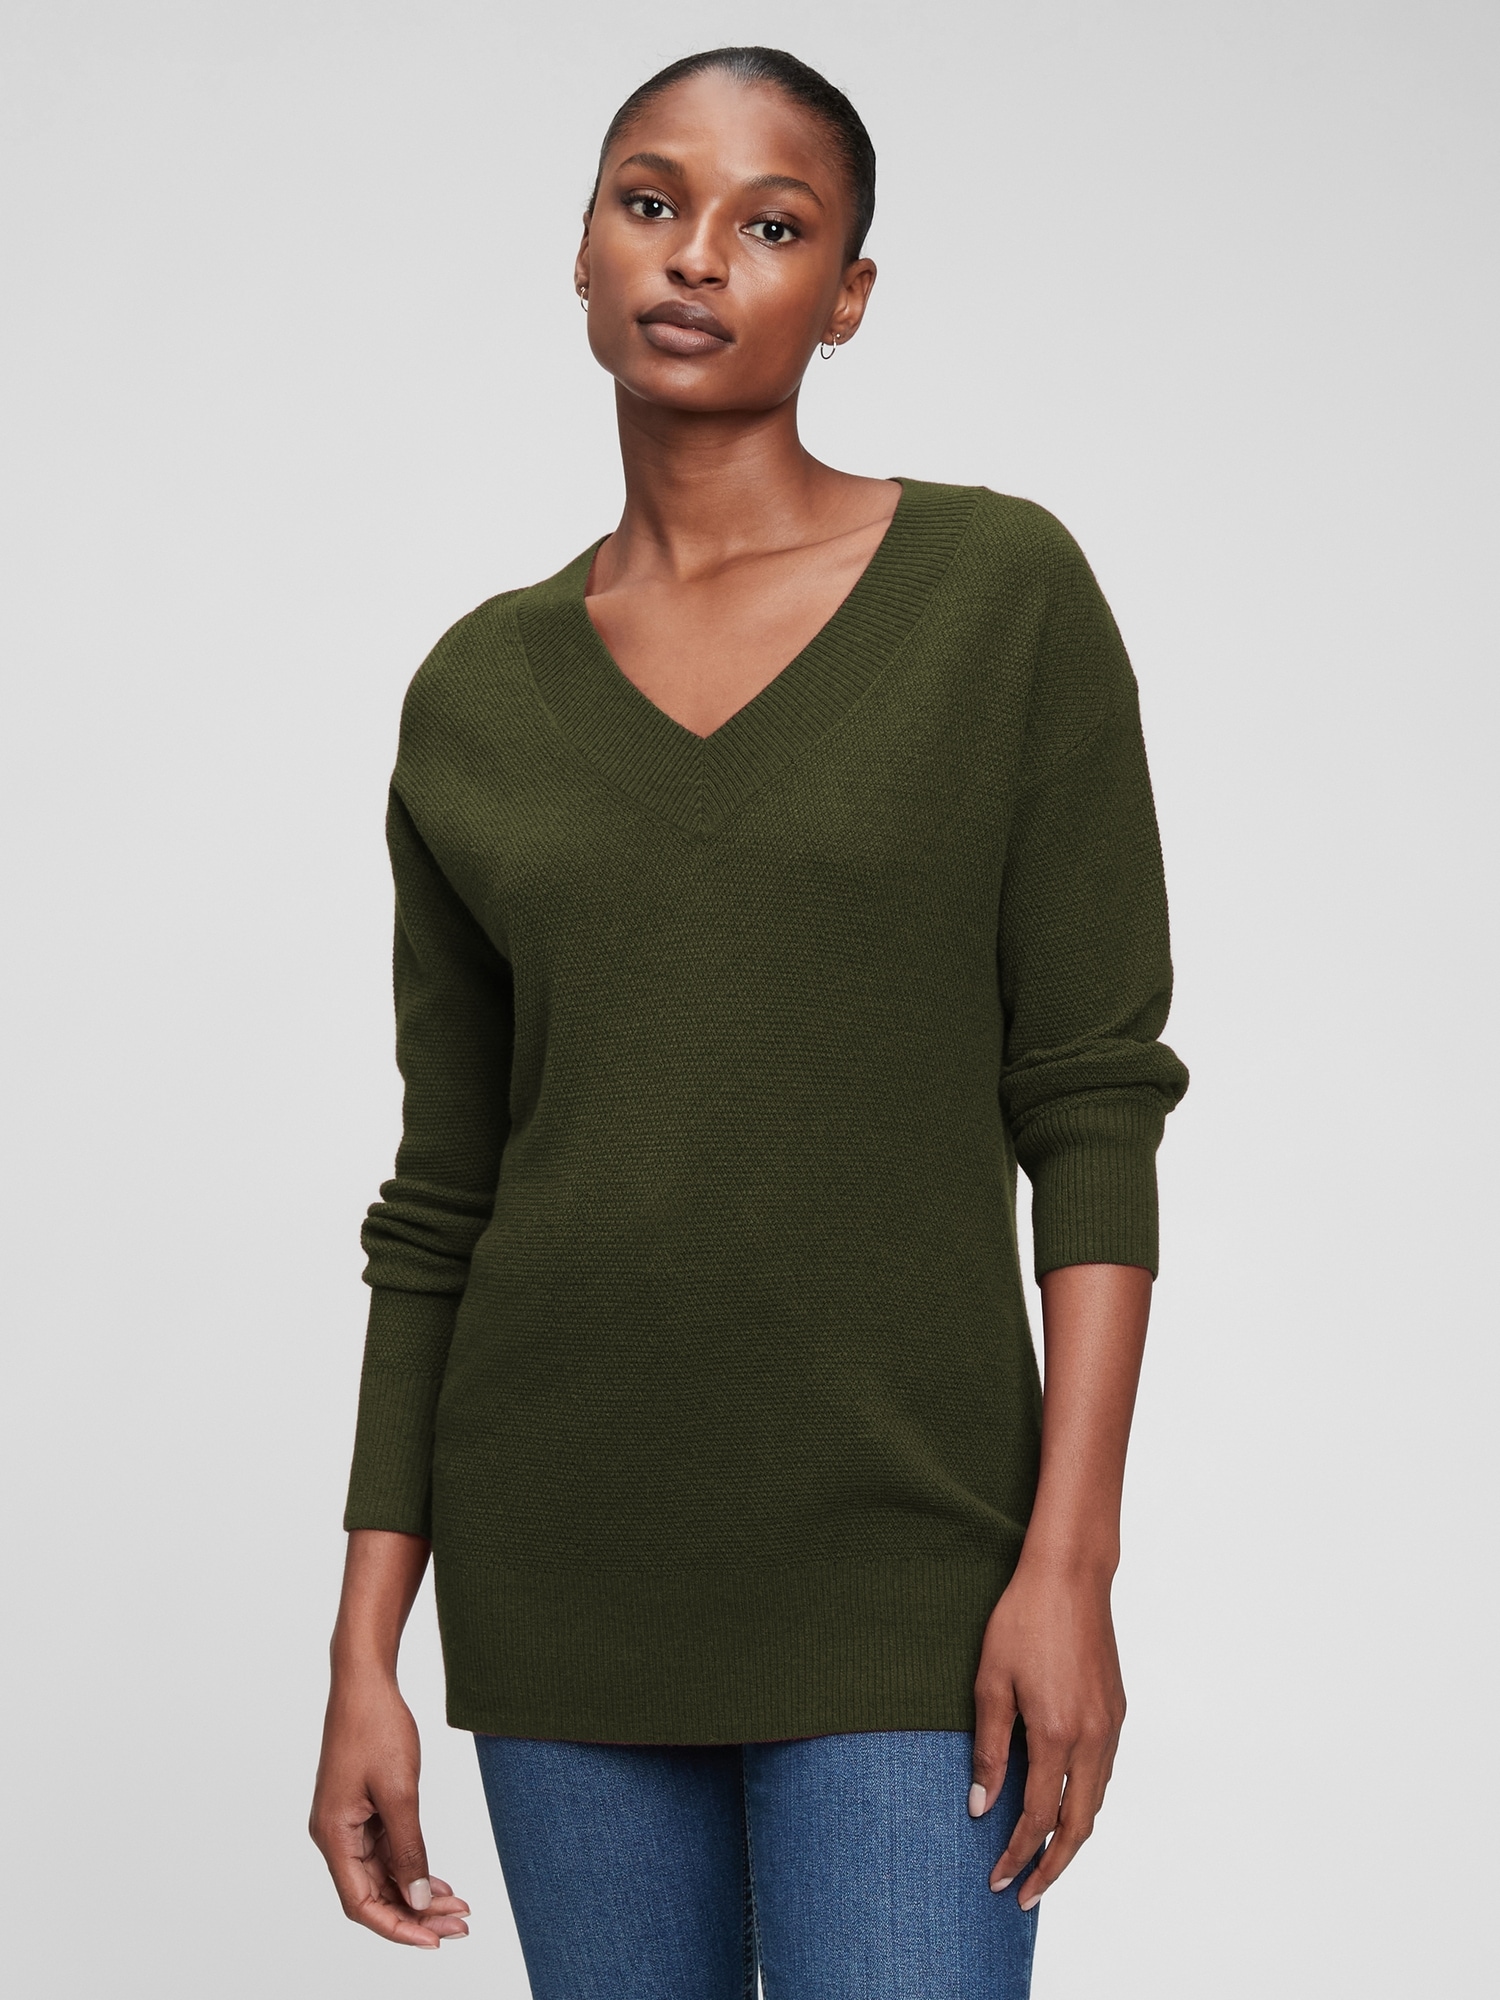 Buy Women Olive Textured Turtle Neck Casual Sweater Online